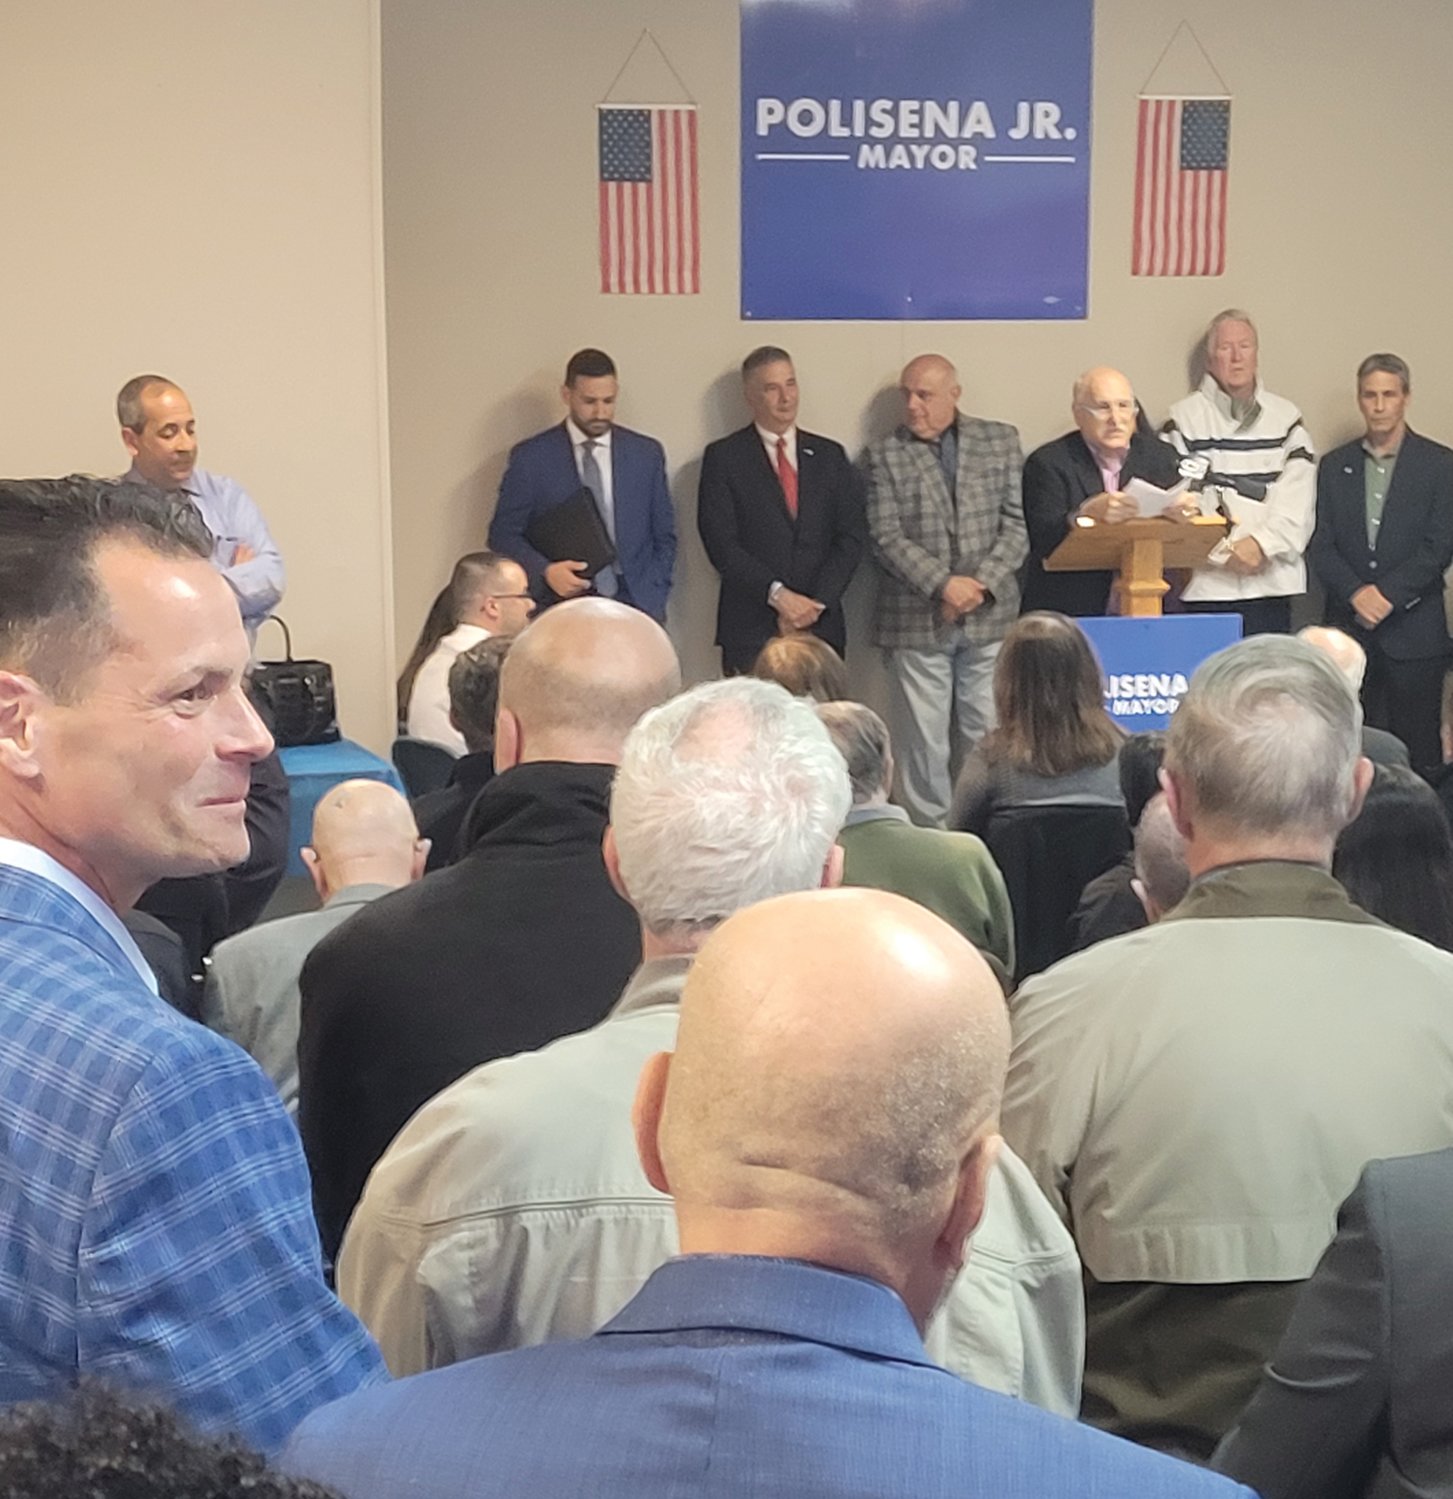 BIG CROWD: Johnston Mayor Joseph M. Polisena introduced his son to an overflow crowd in an empty storefront in Town Hall Plaza. Joe Polisena Jr. announced his candidacy for mayor, in front of friends, family, local politicians and key community representatives.